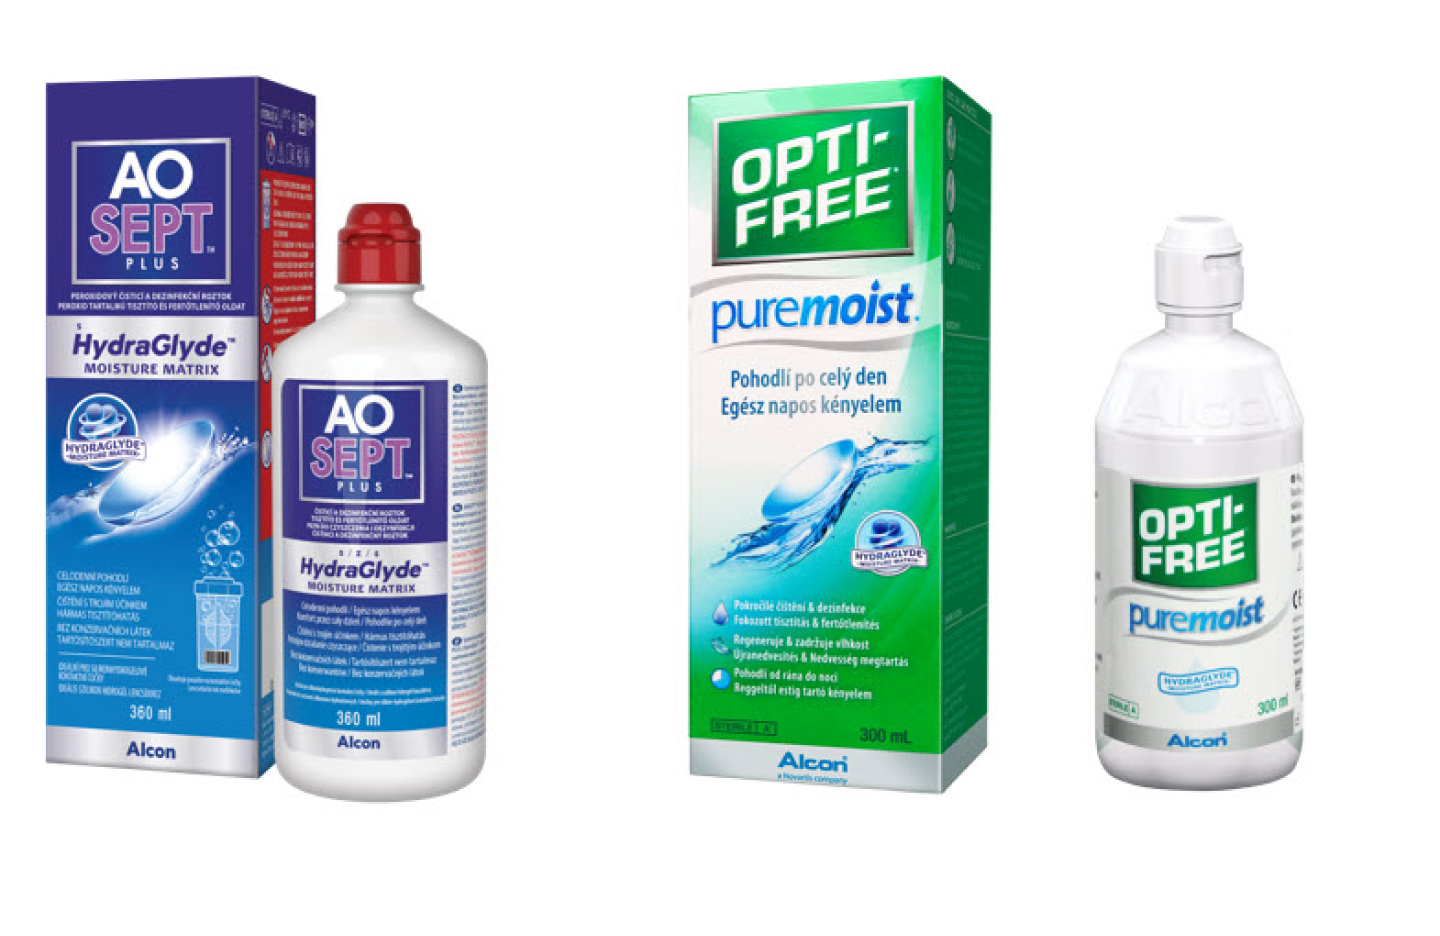 AO SEPT plus HydraGlyde and OPTI-FREE puremoist products